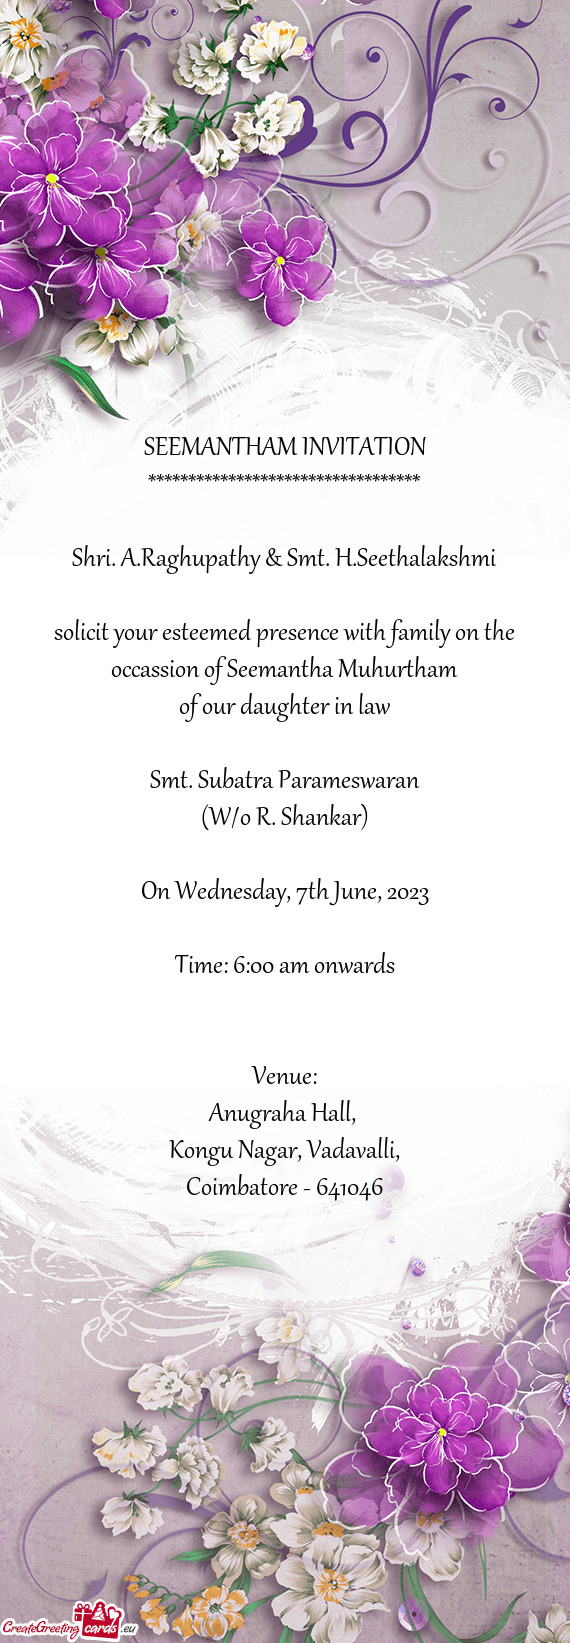 Solicit your esteemed presence with family on the occassion of Seemantha Muhurtham